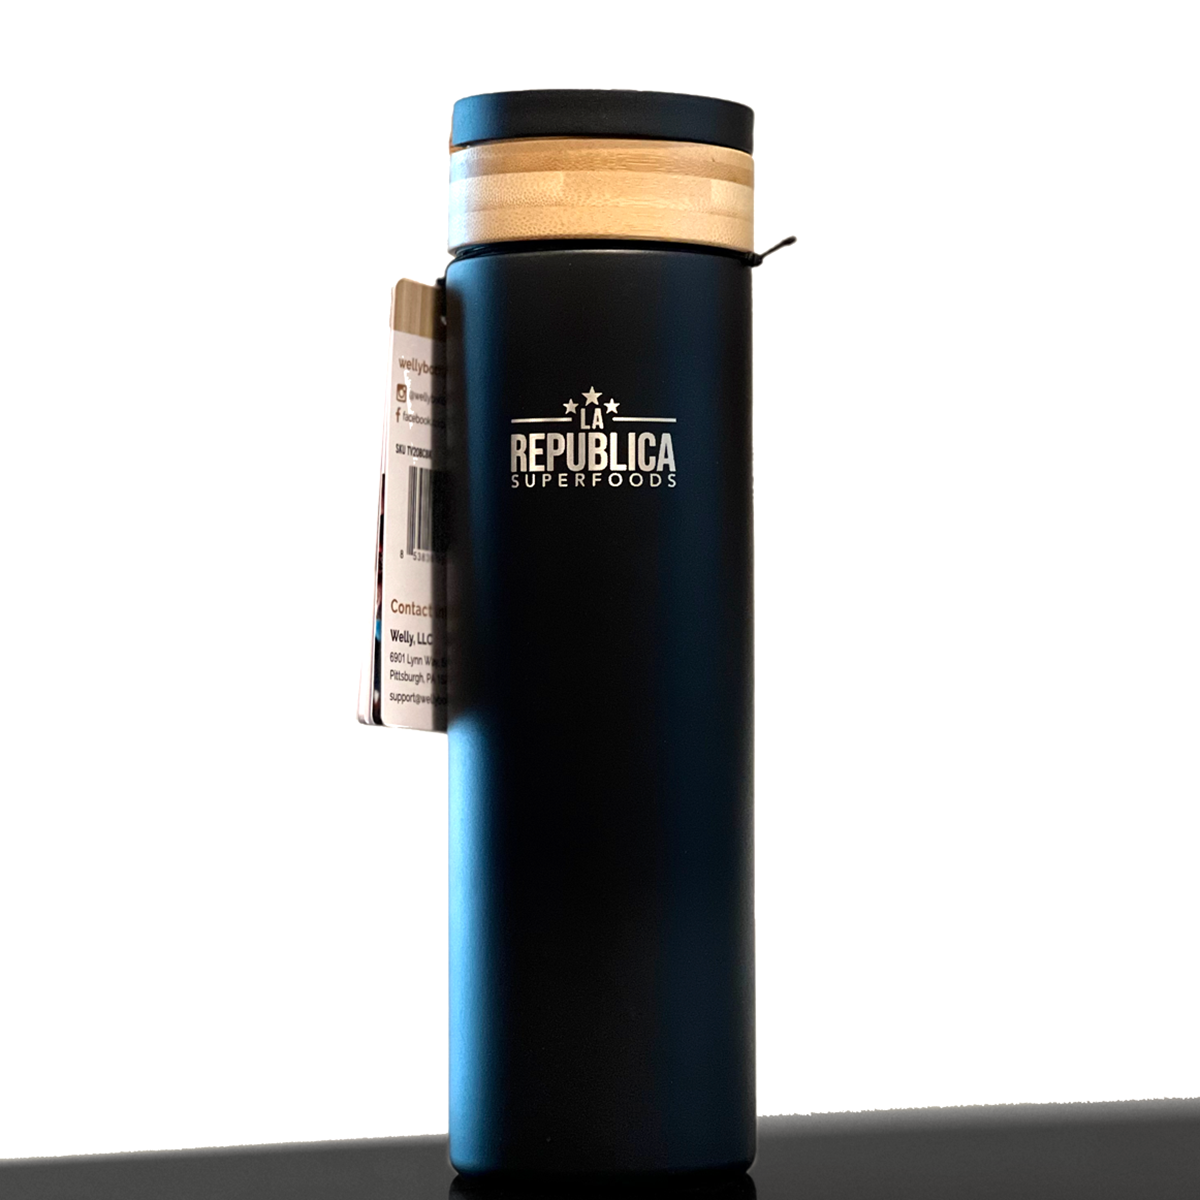 Traveler 20oz - Black  Vacuum Insulated Stainless Steel by Welly